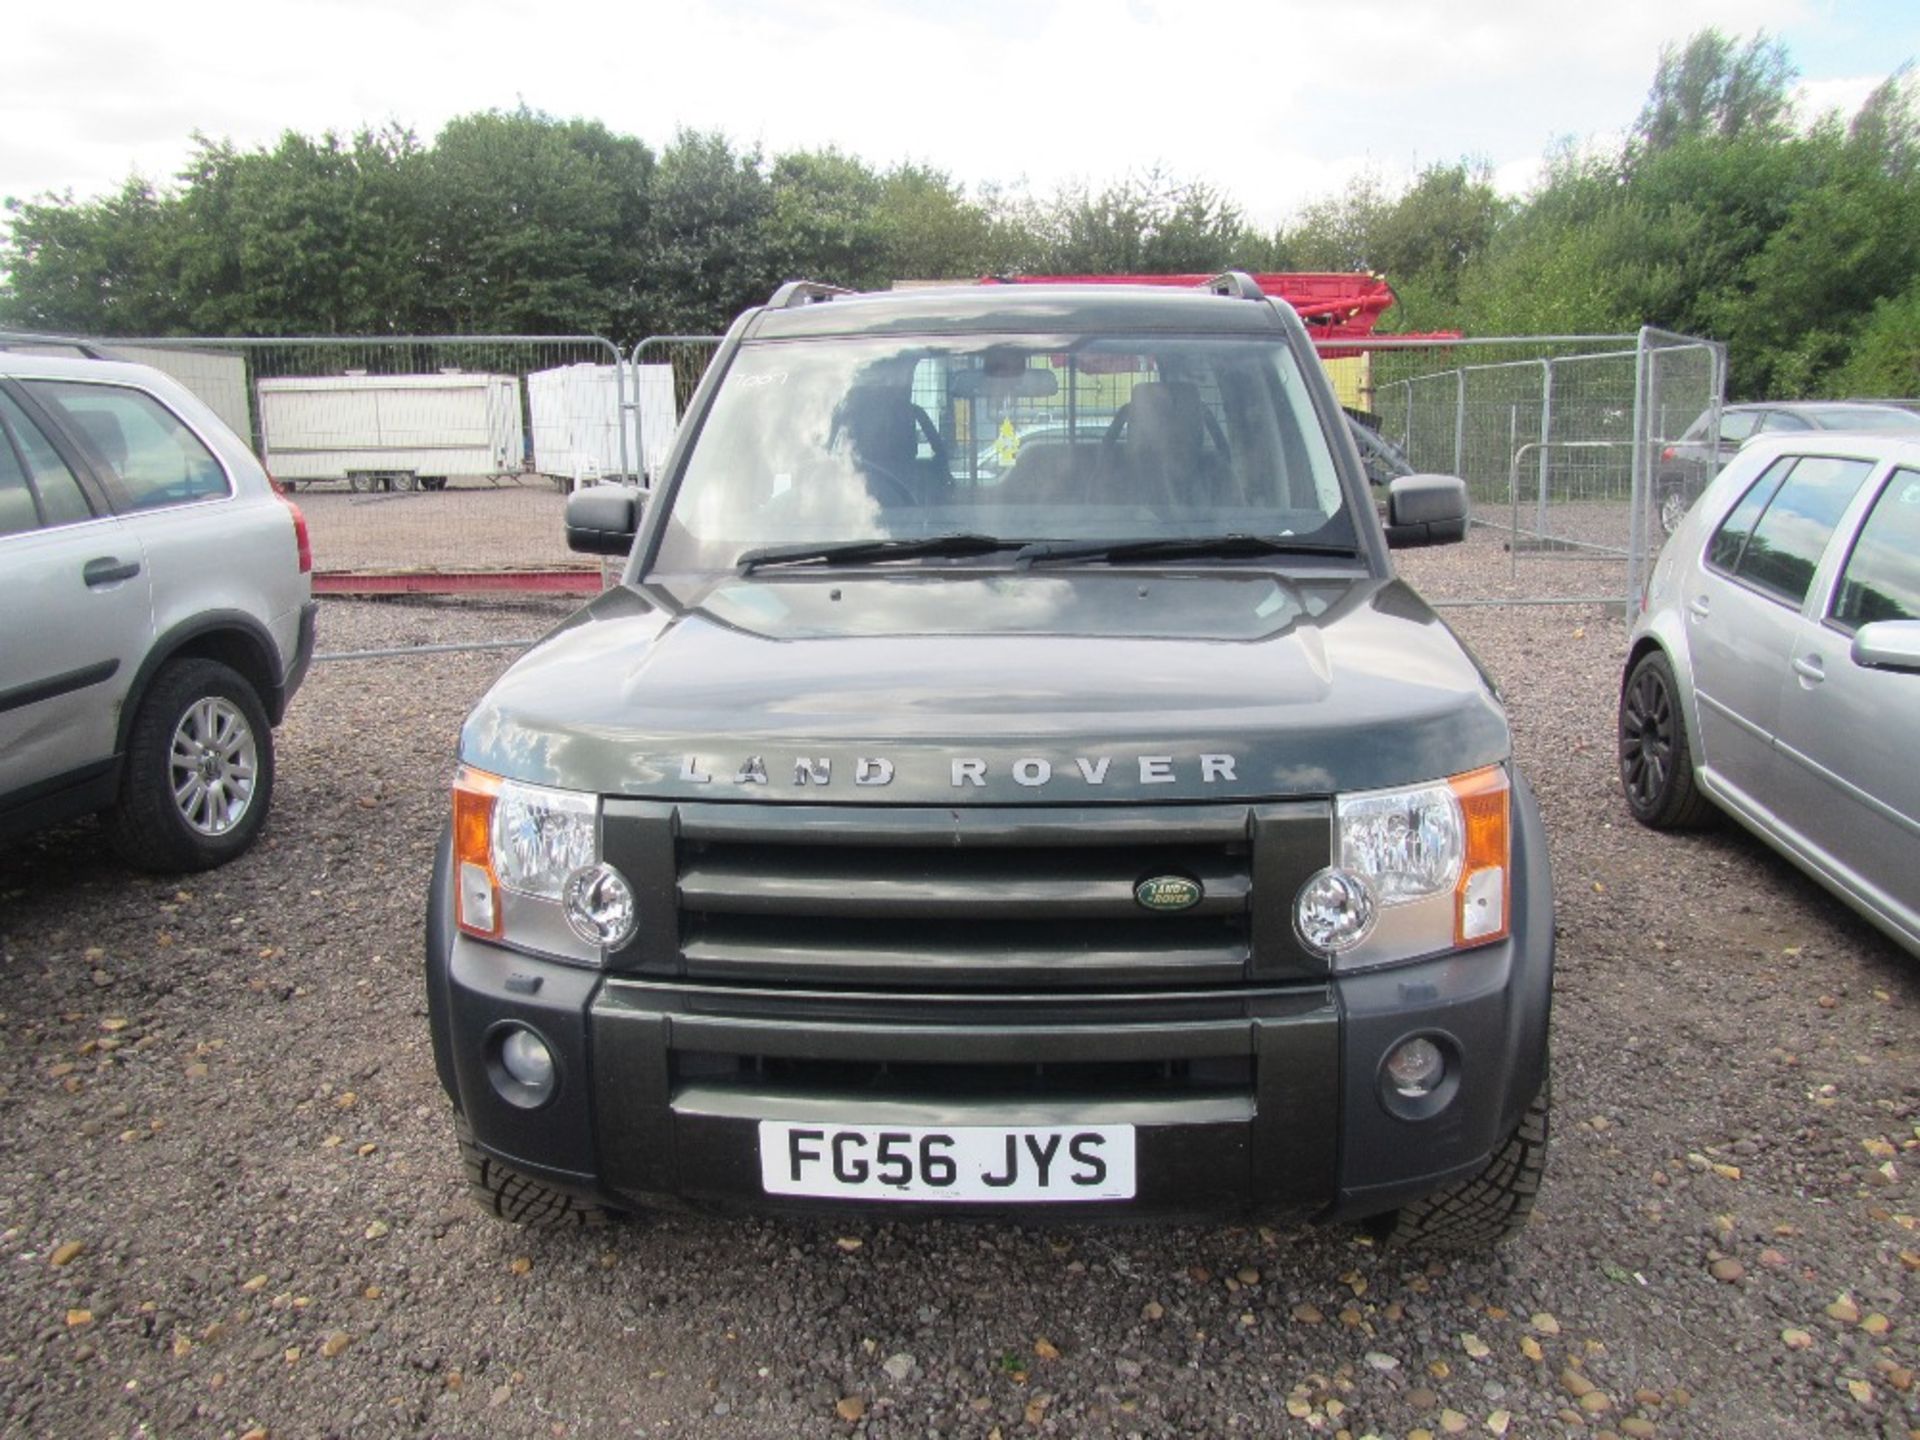 Land Rover Discovery TDV6 S Van with 2 Seats, Parts Service History, Harmon Kardon Sound, 6 Stack - Image 2 of 6